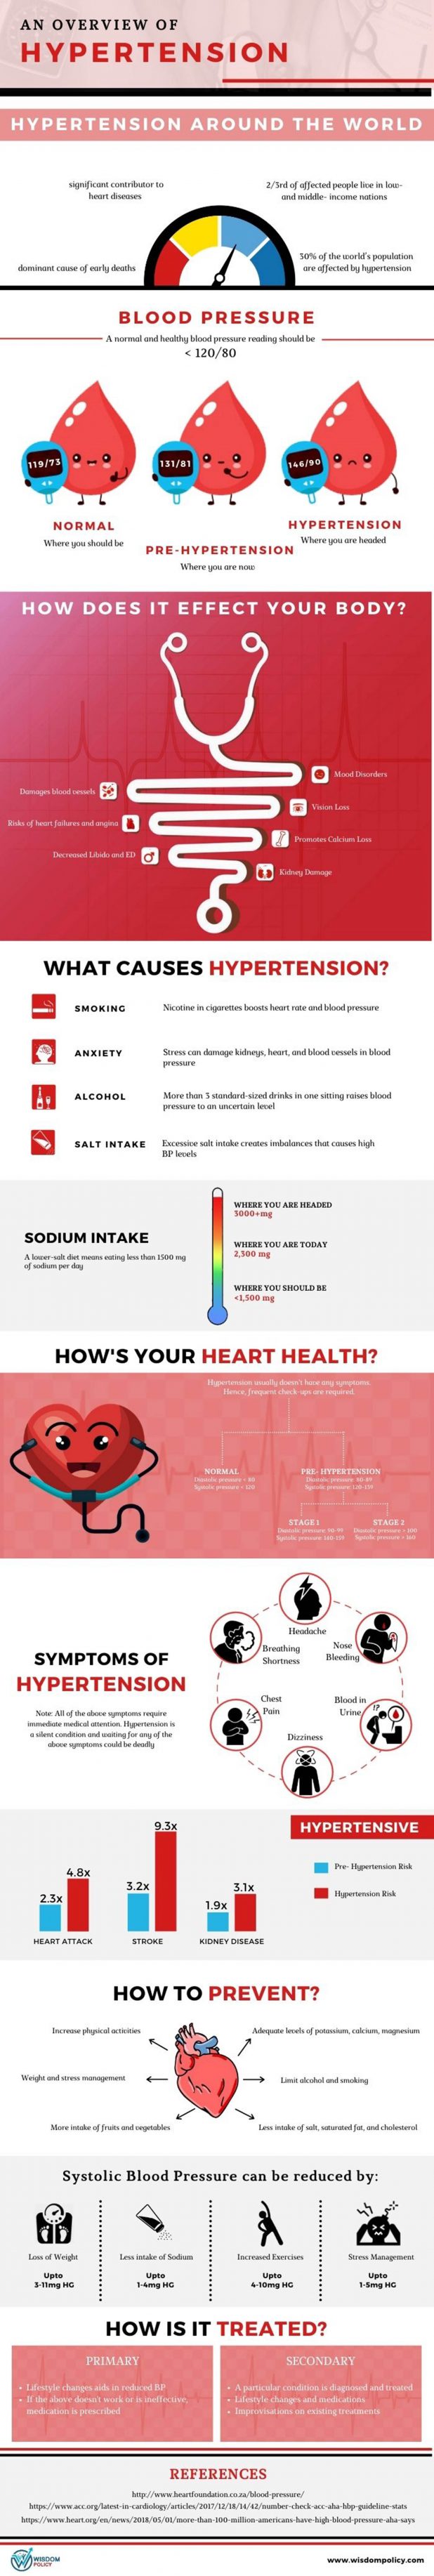 An Overview of Hypertension